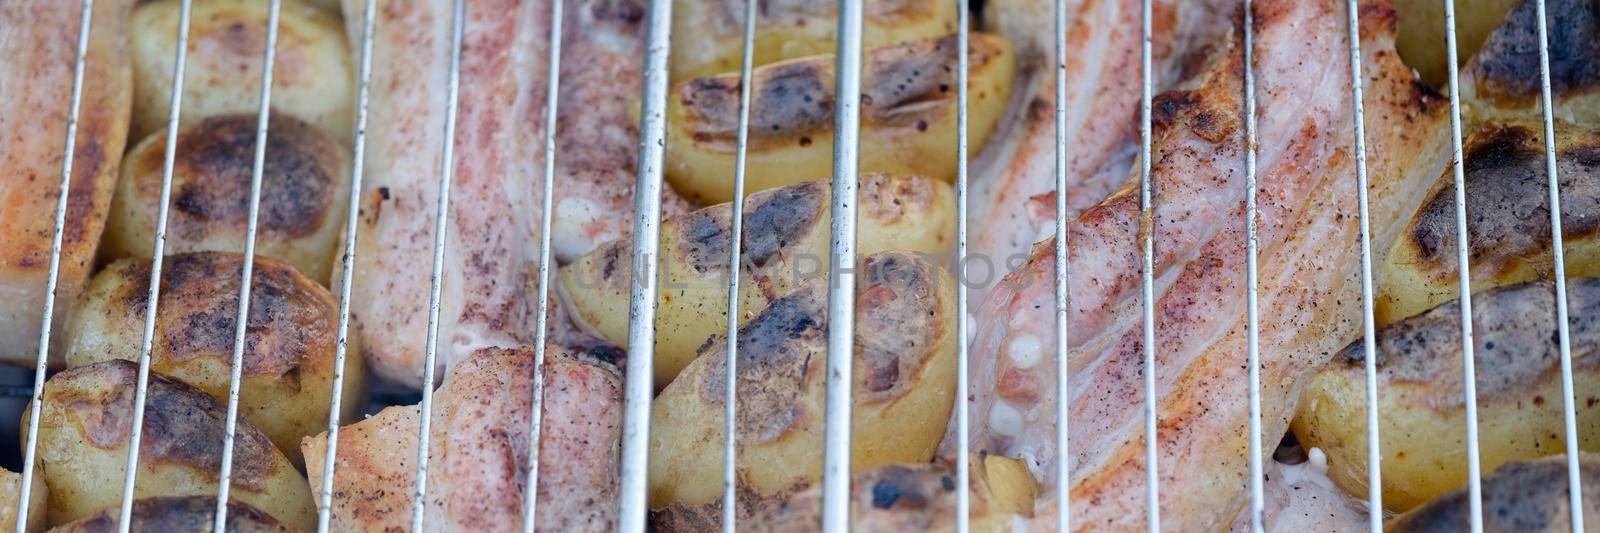 Grill potatoes and meat on wire rack closeup by kuprevich